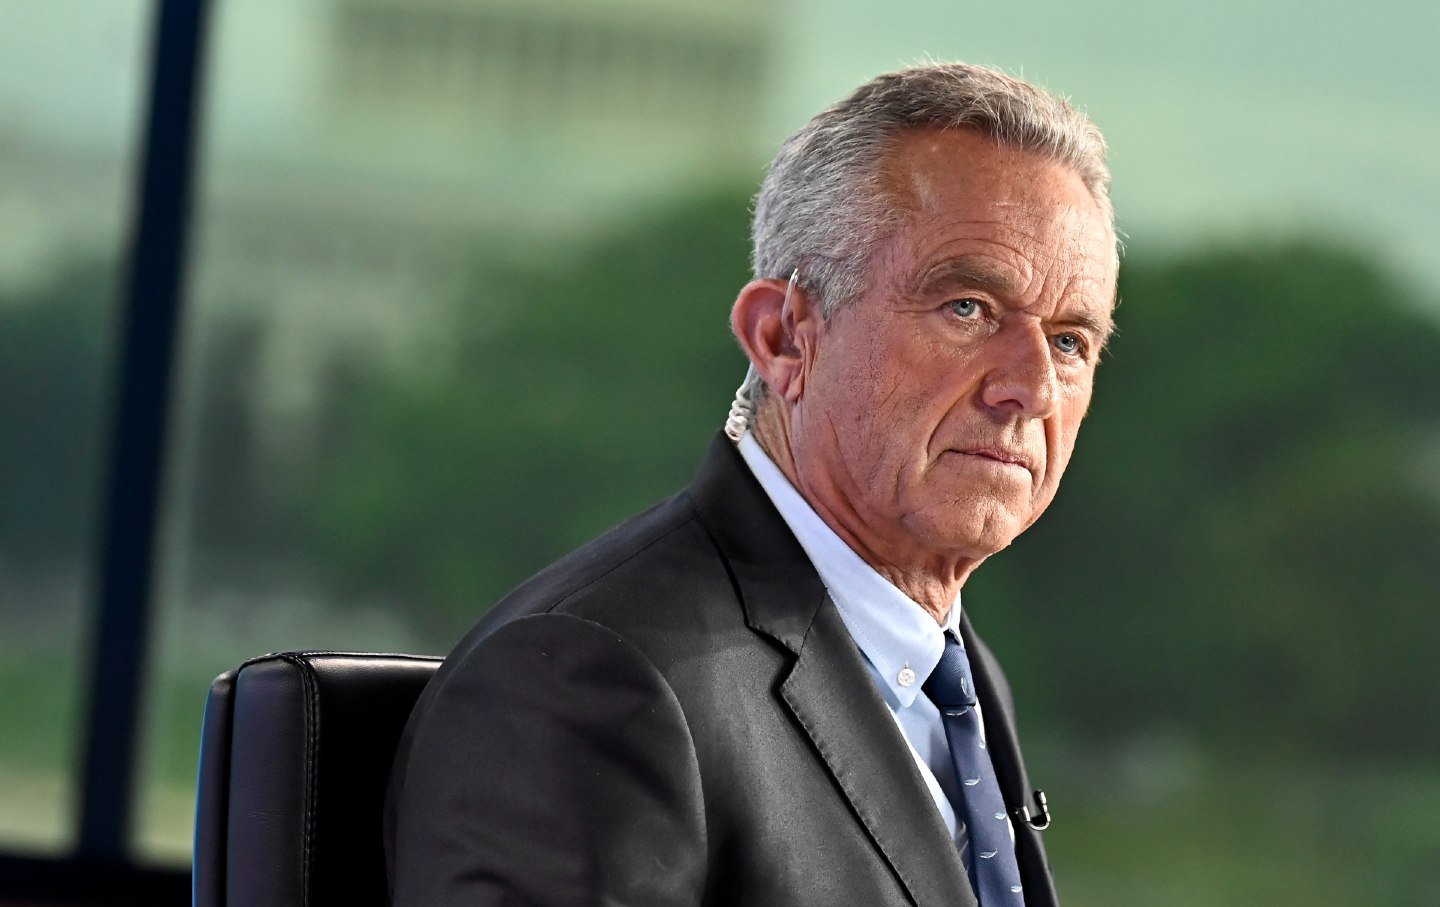 RFK Jr. is polling high for an independent